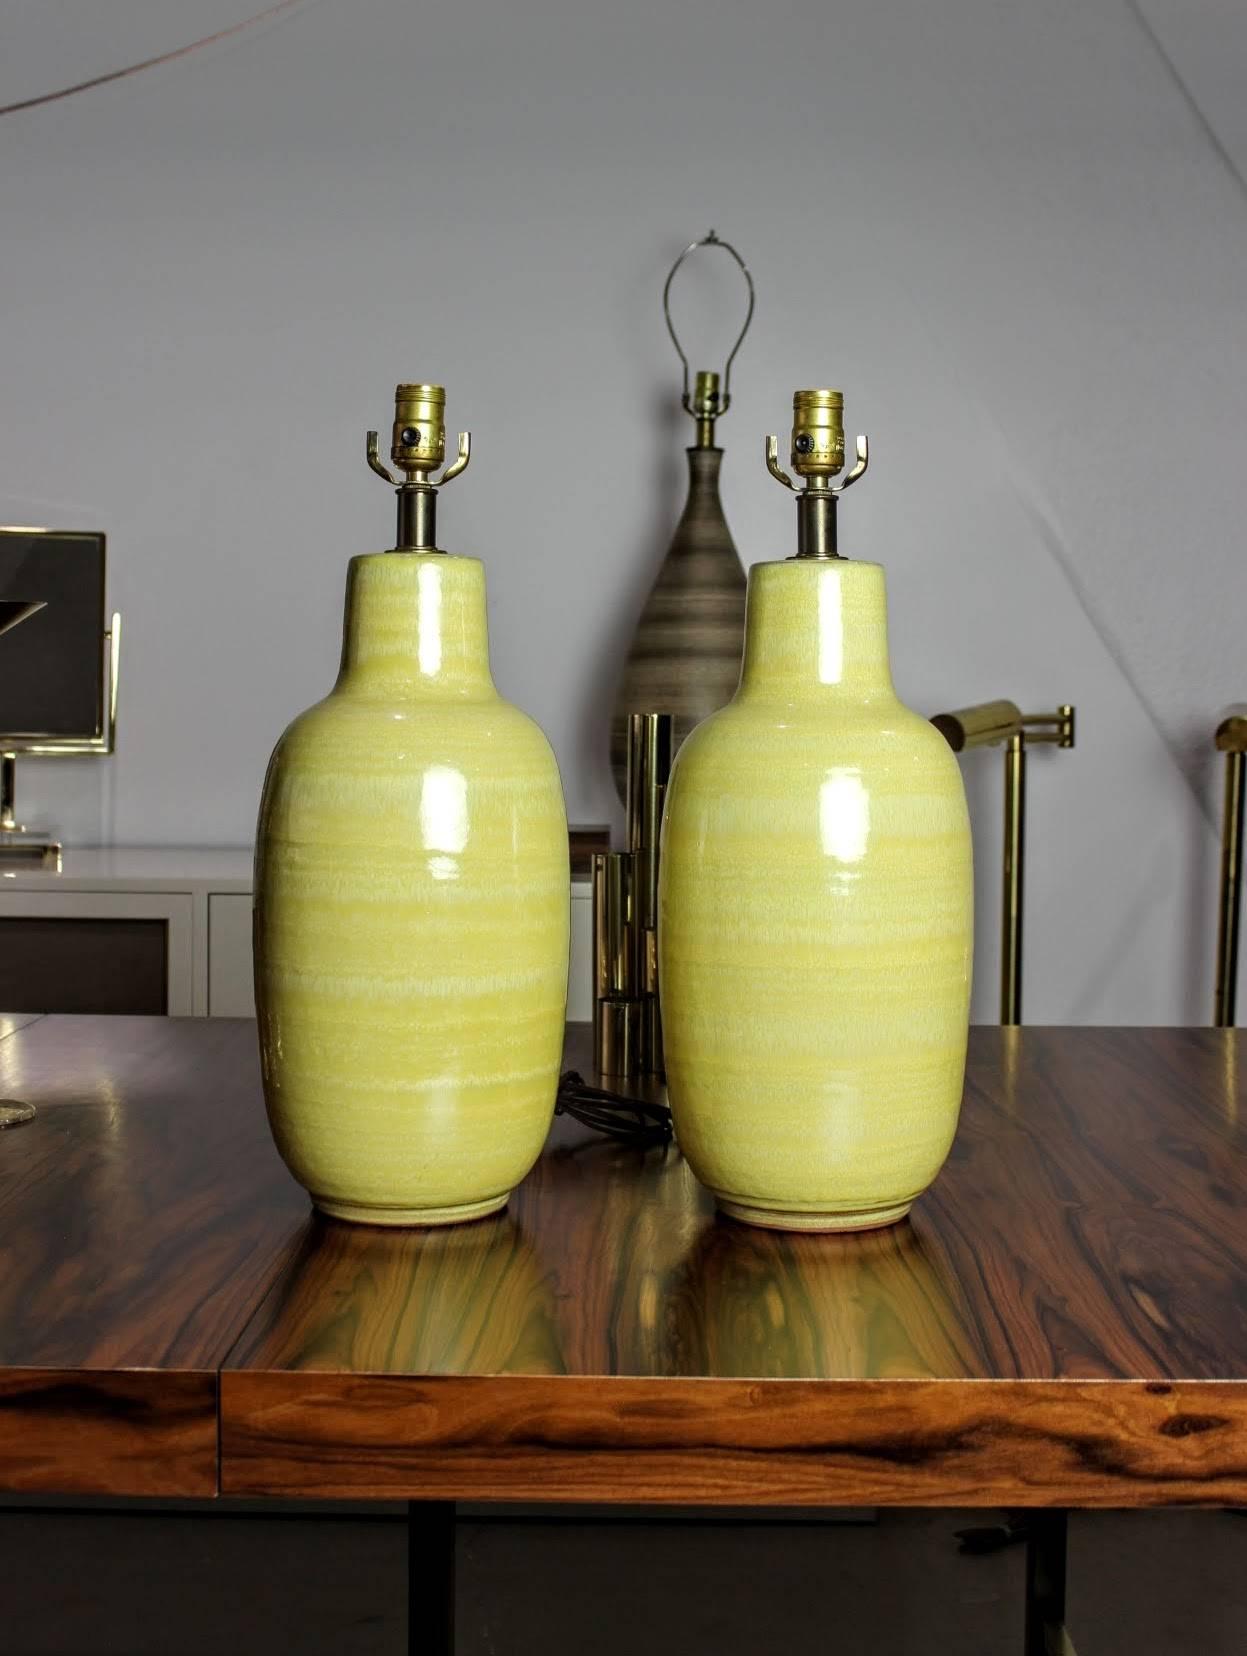 Vibrant yellow ceramic table lamps by Design Technics, 1960s. Beautifully thrown with a gorgeous yellow glaze with a modernist ginger jar shape. Such a great pop of color for any room. Excellent condition.

Dimensions: 22